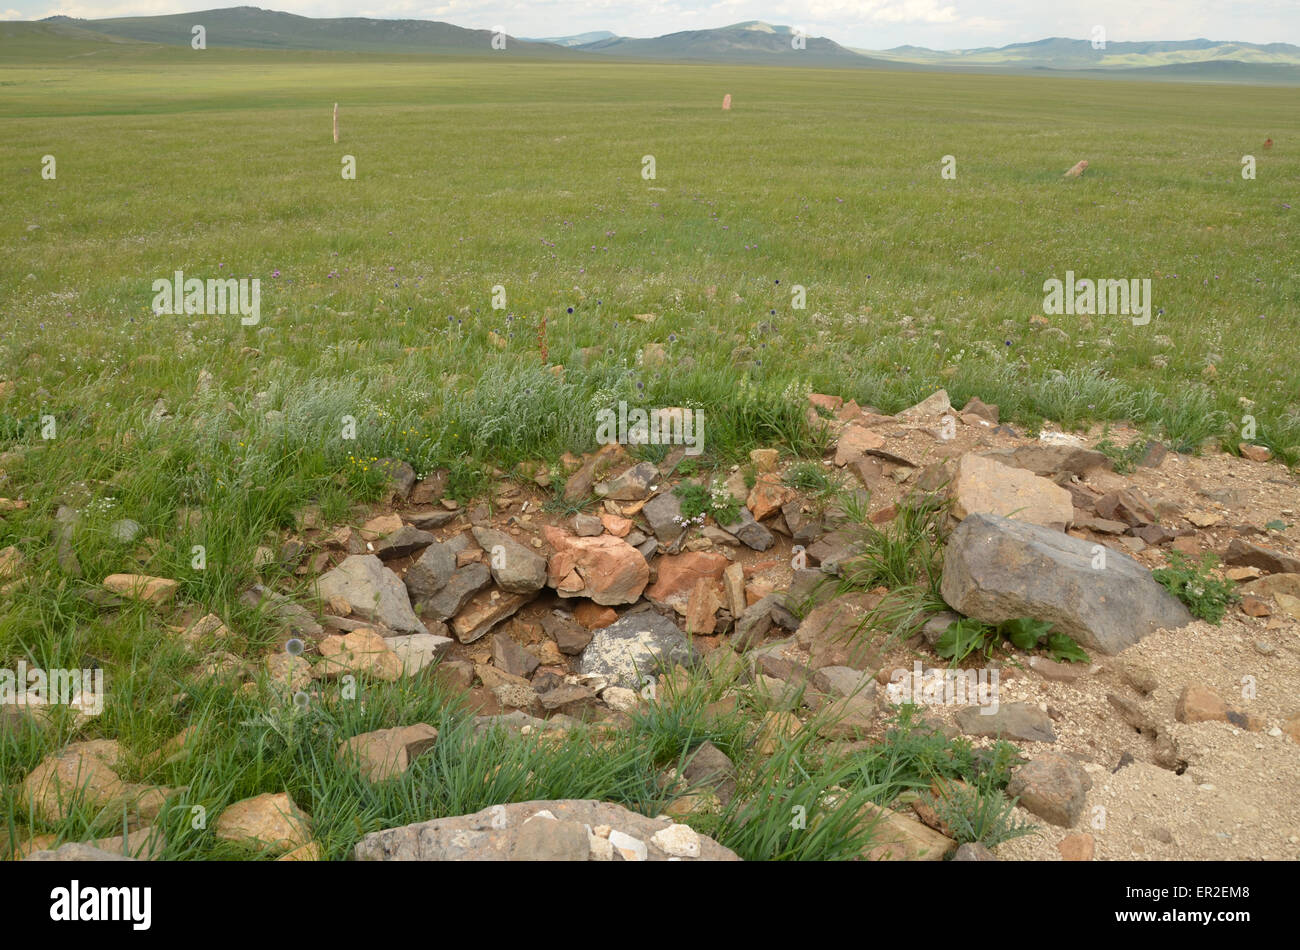 Deer stones viewed from the top of a burial mound in the Ovsgol province, northern Mongolia. Stock Photo